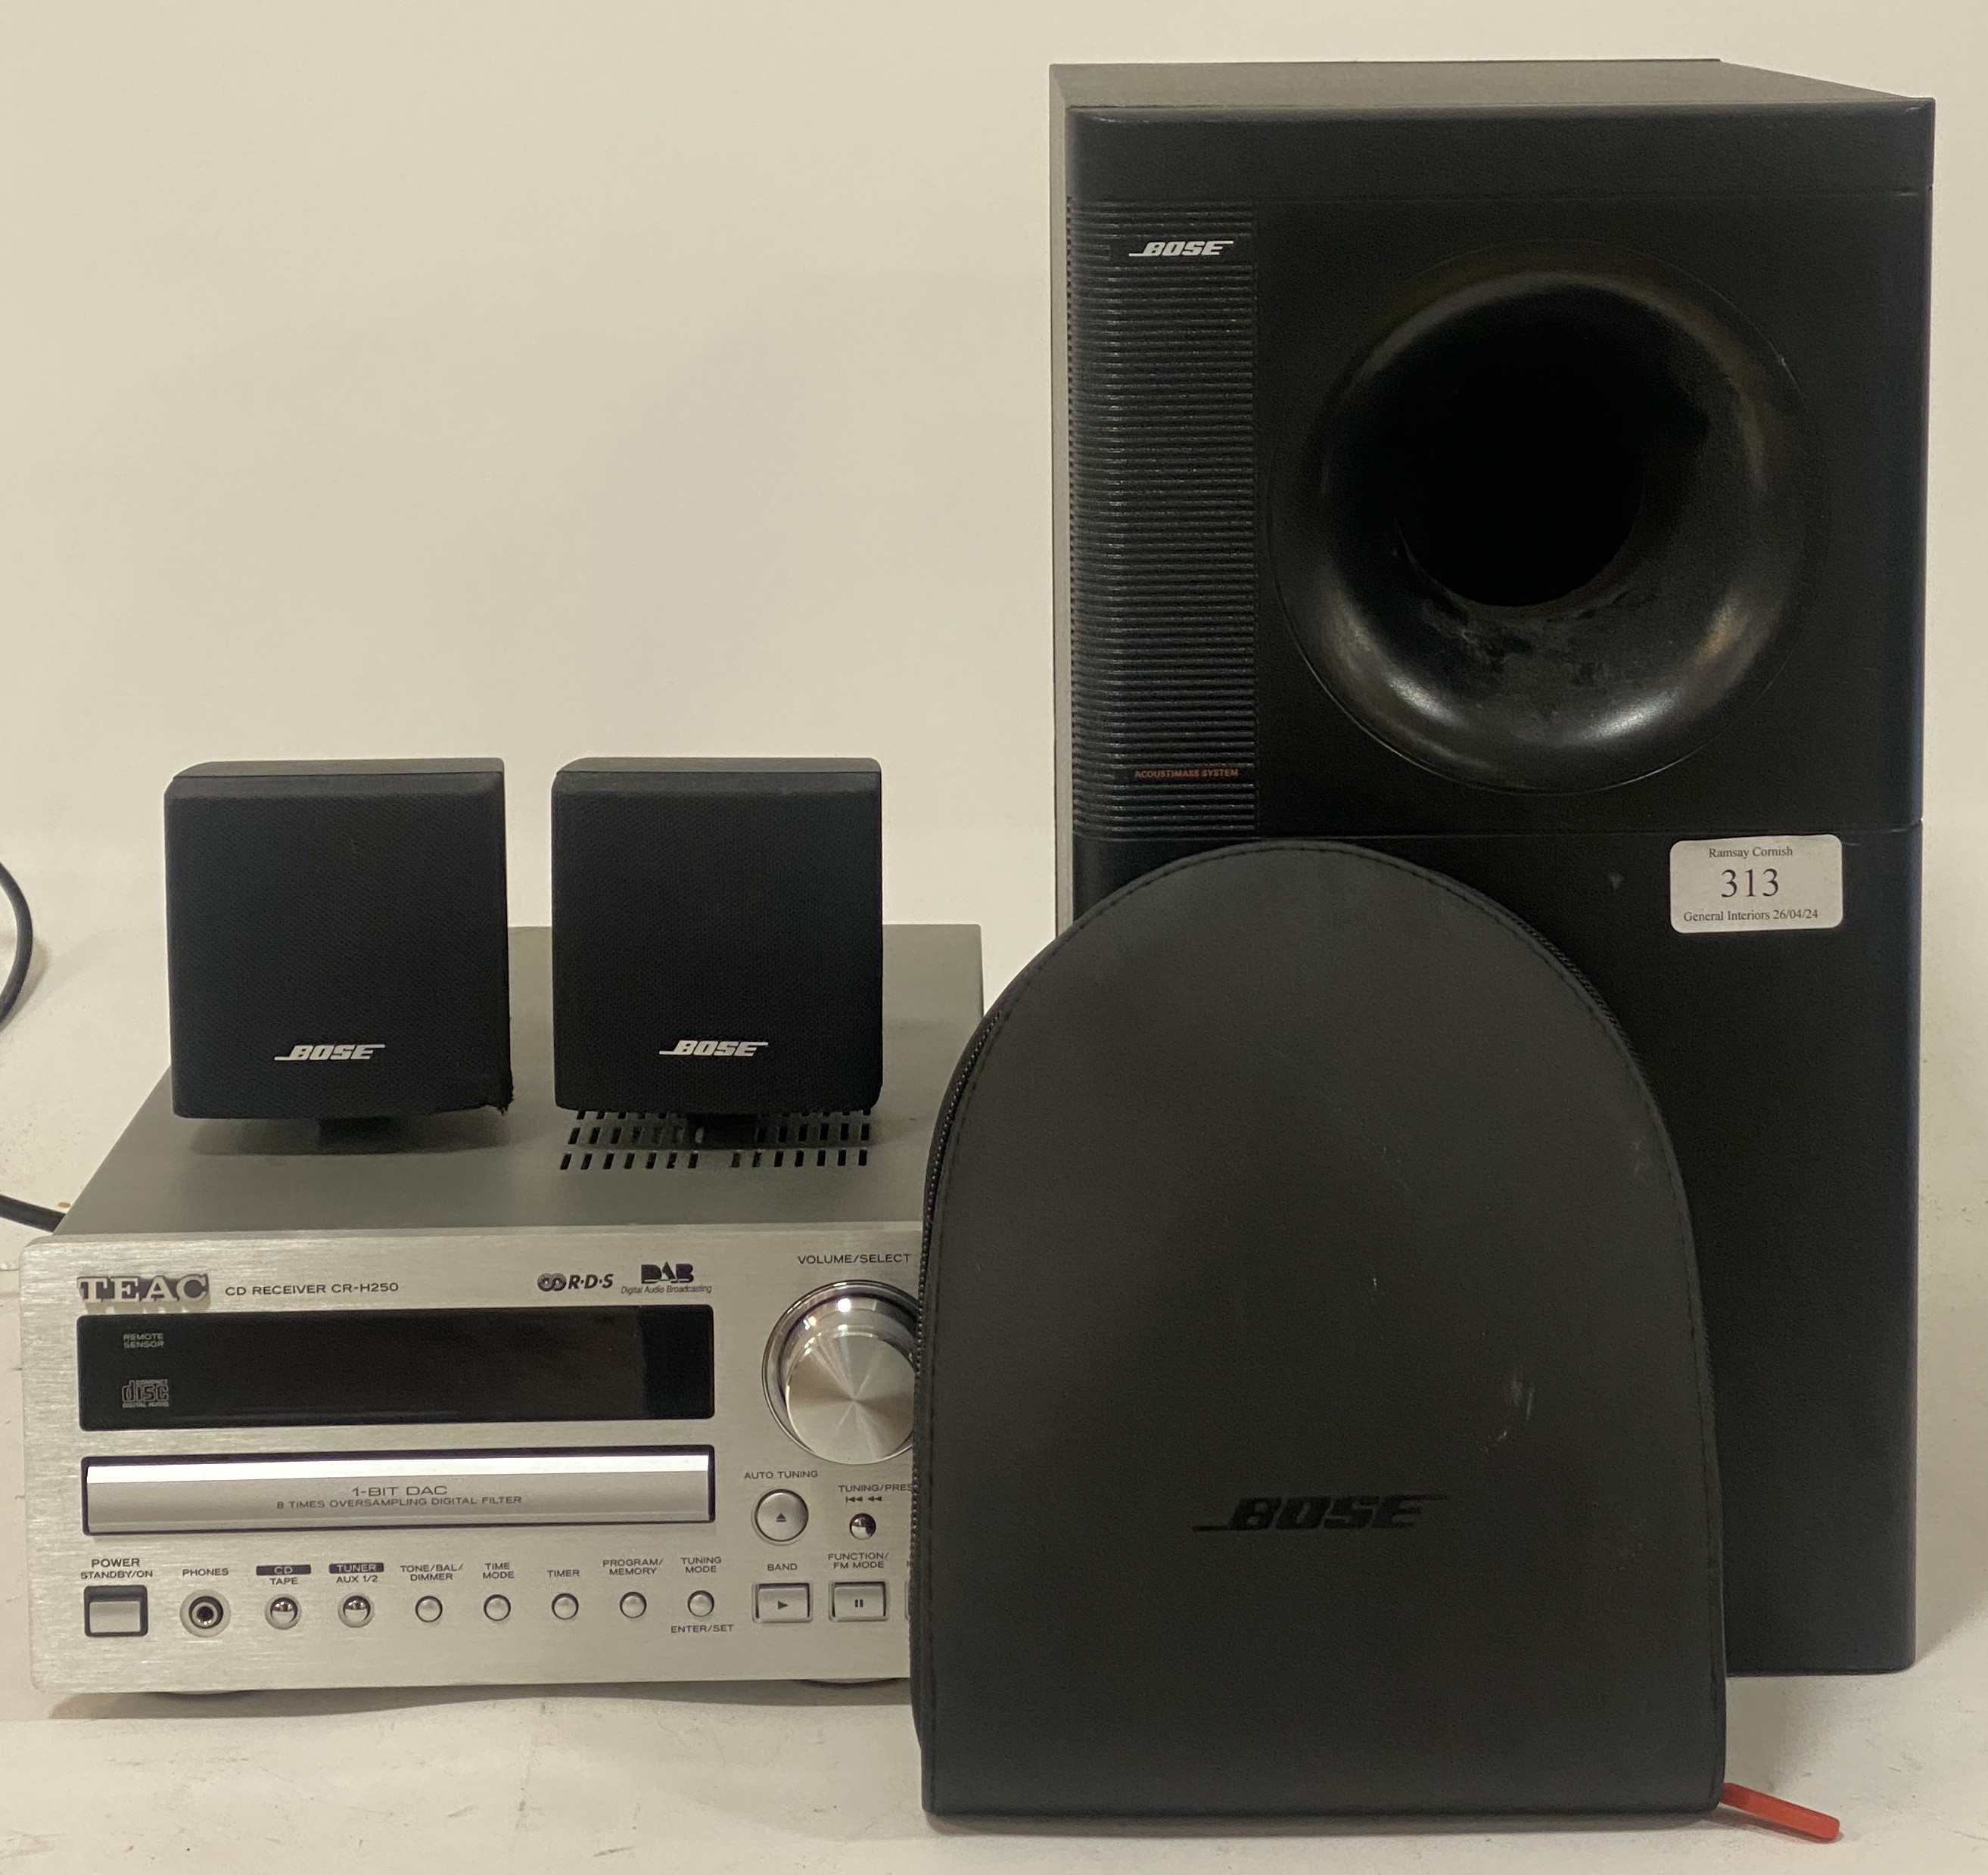 A Bose Acoustimass audio system, comprising a subwoofer and two cube satellite speakers (3) together